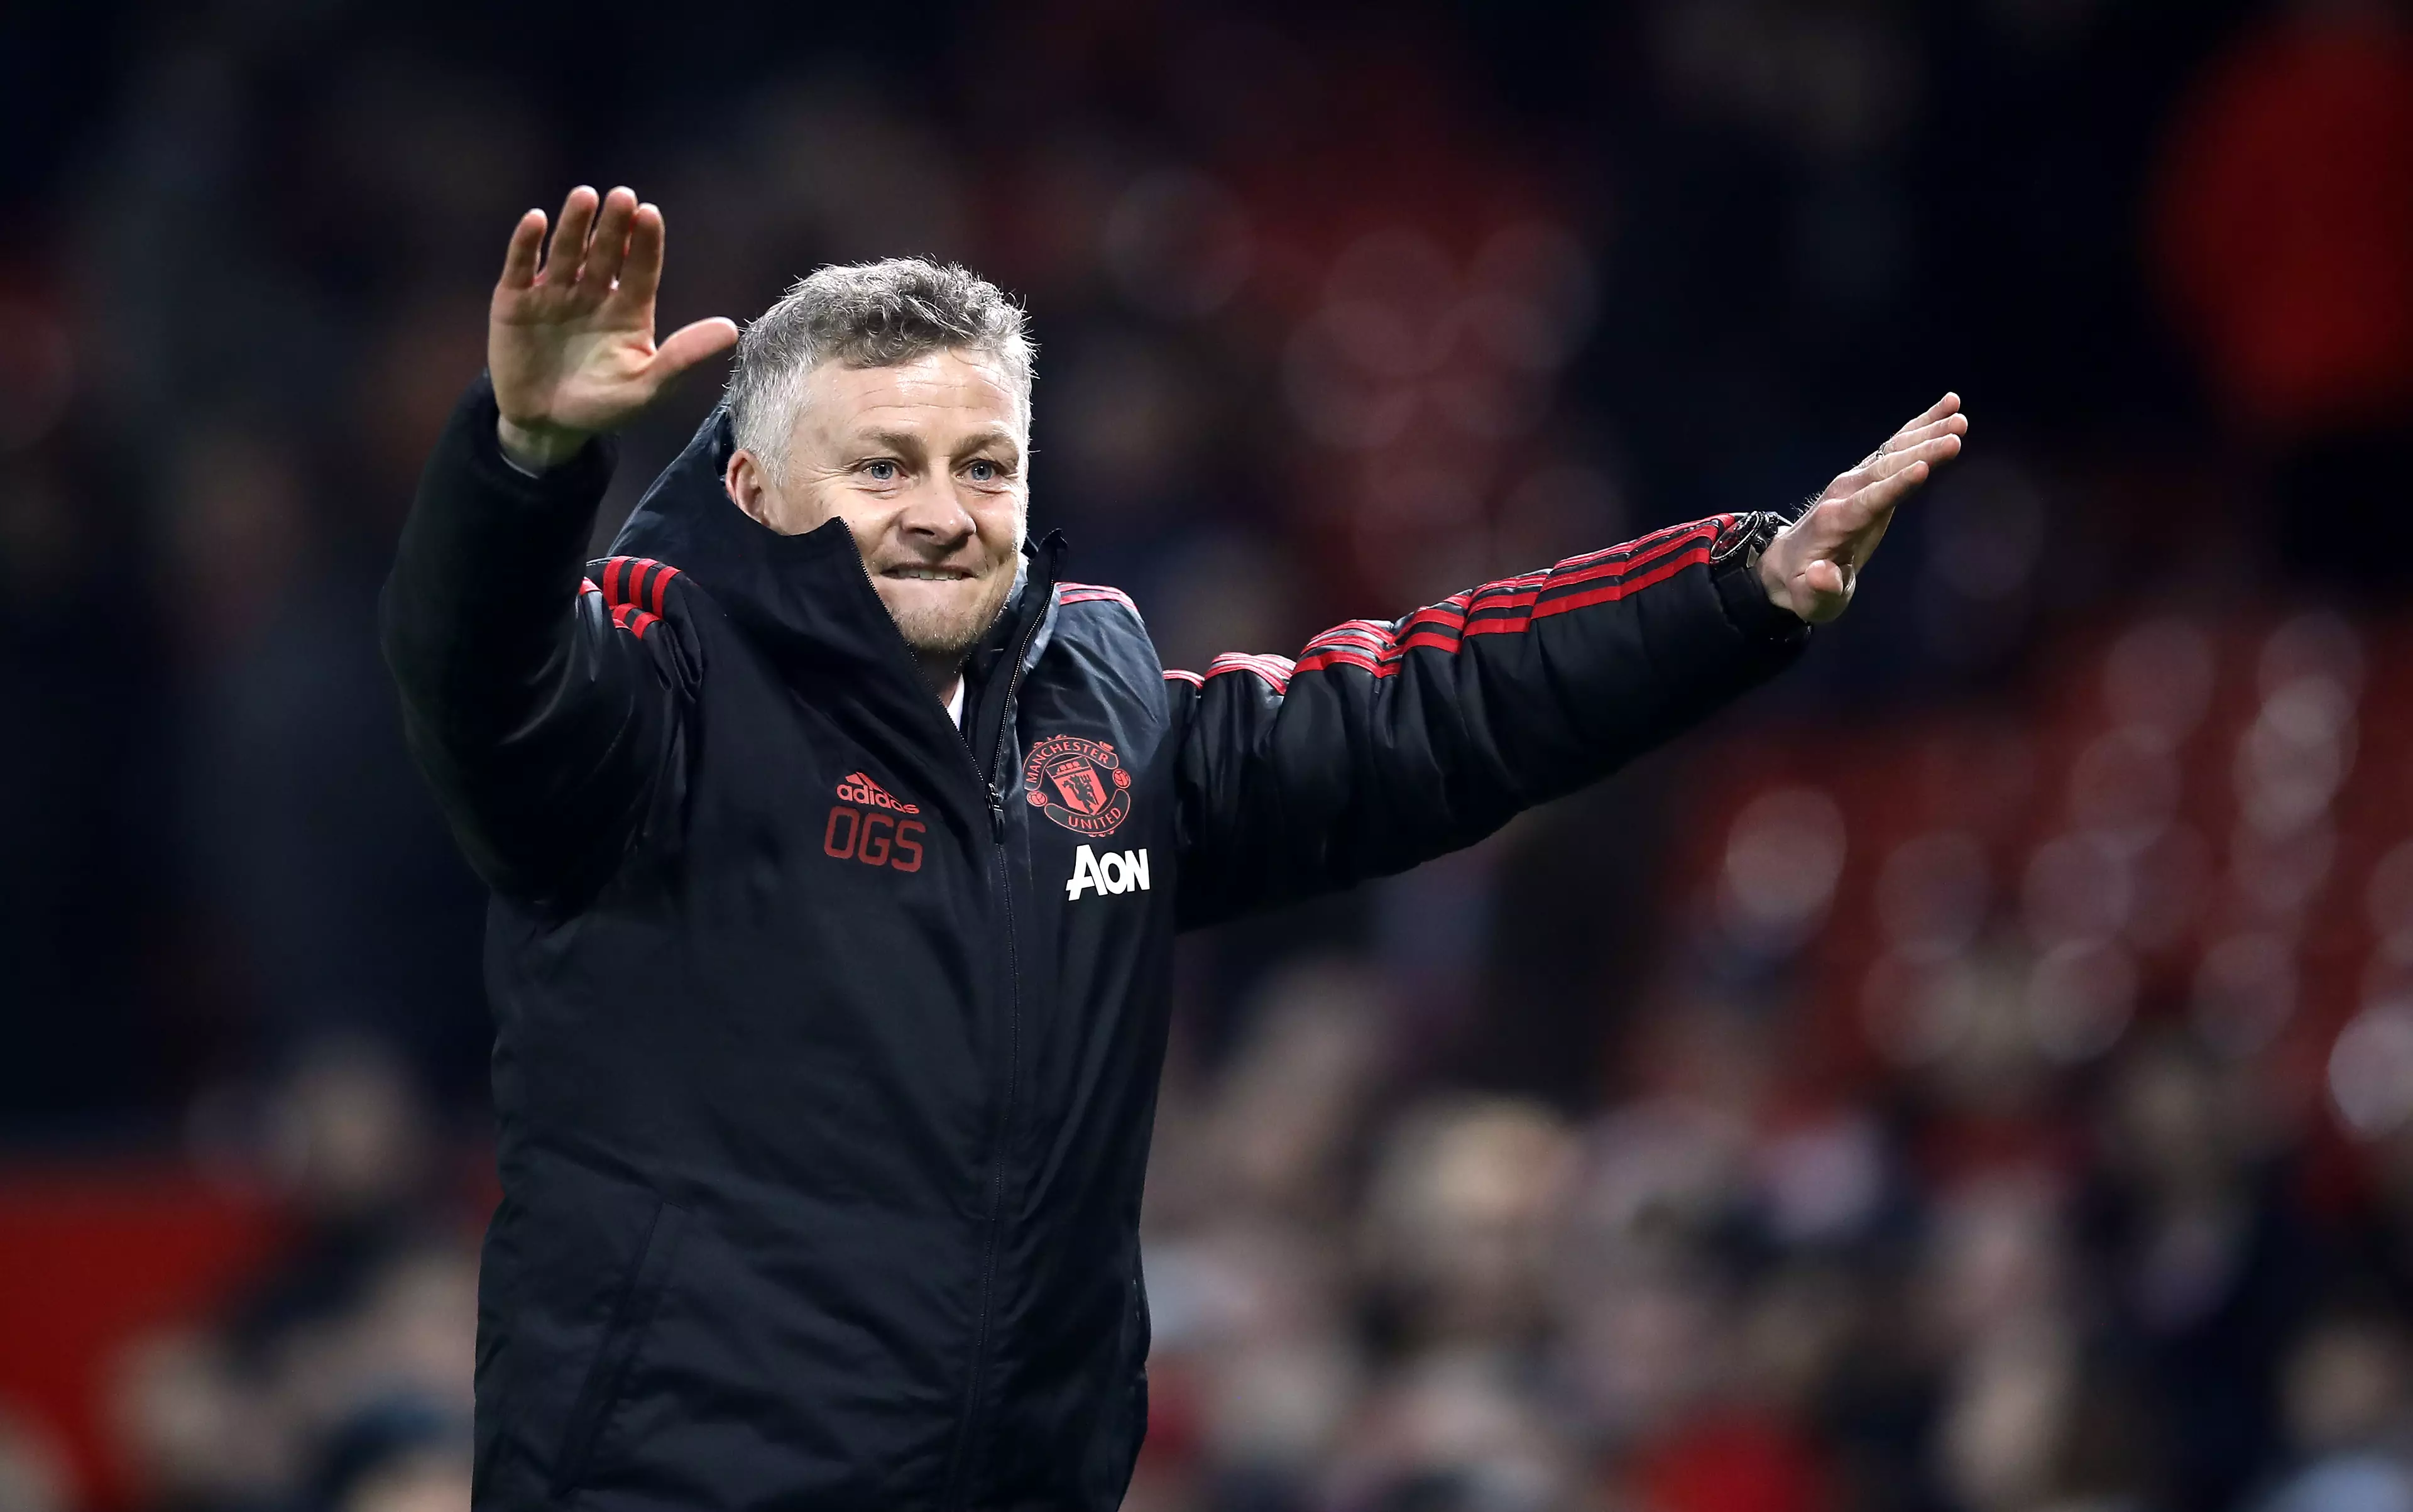 Ole was still looking fresh faced when he first took the job. Image: PA Images